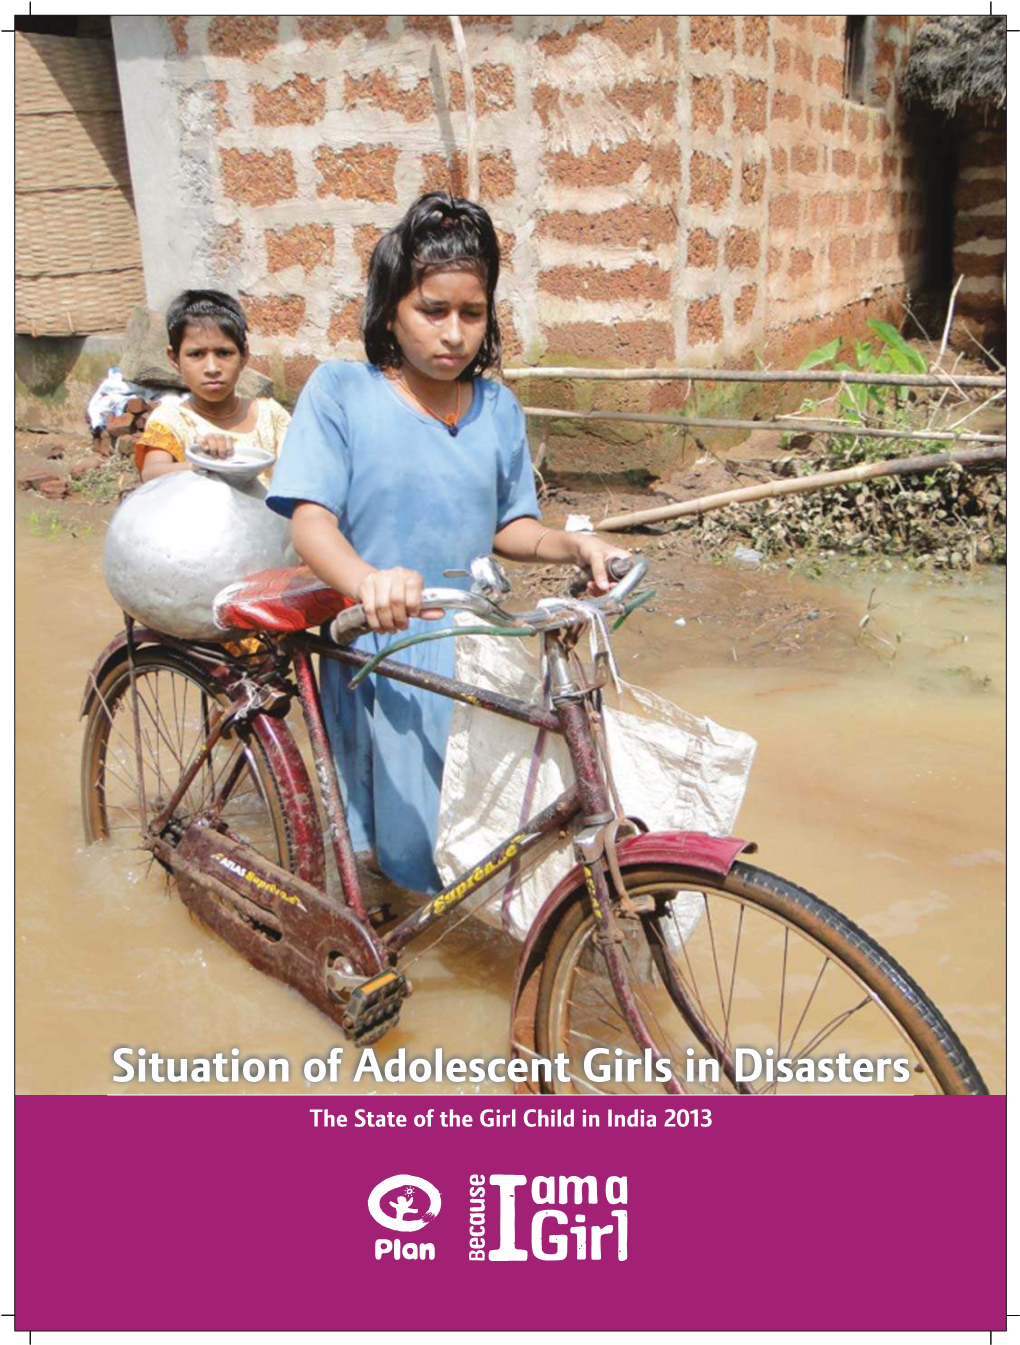 The State of the Girl Child in India 2013 the State of the Girl Child in India 2013